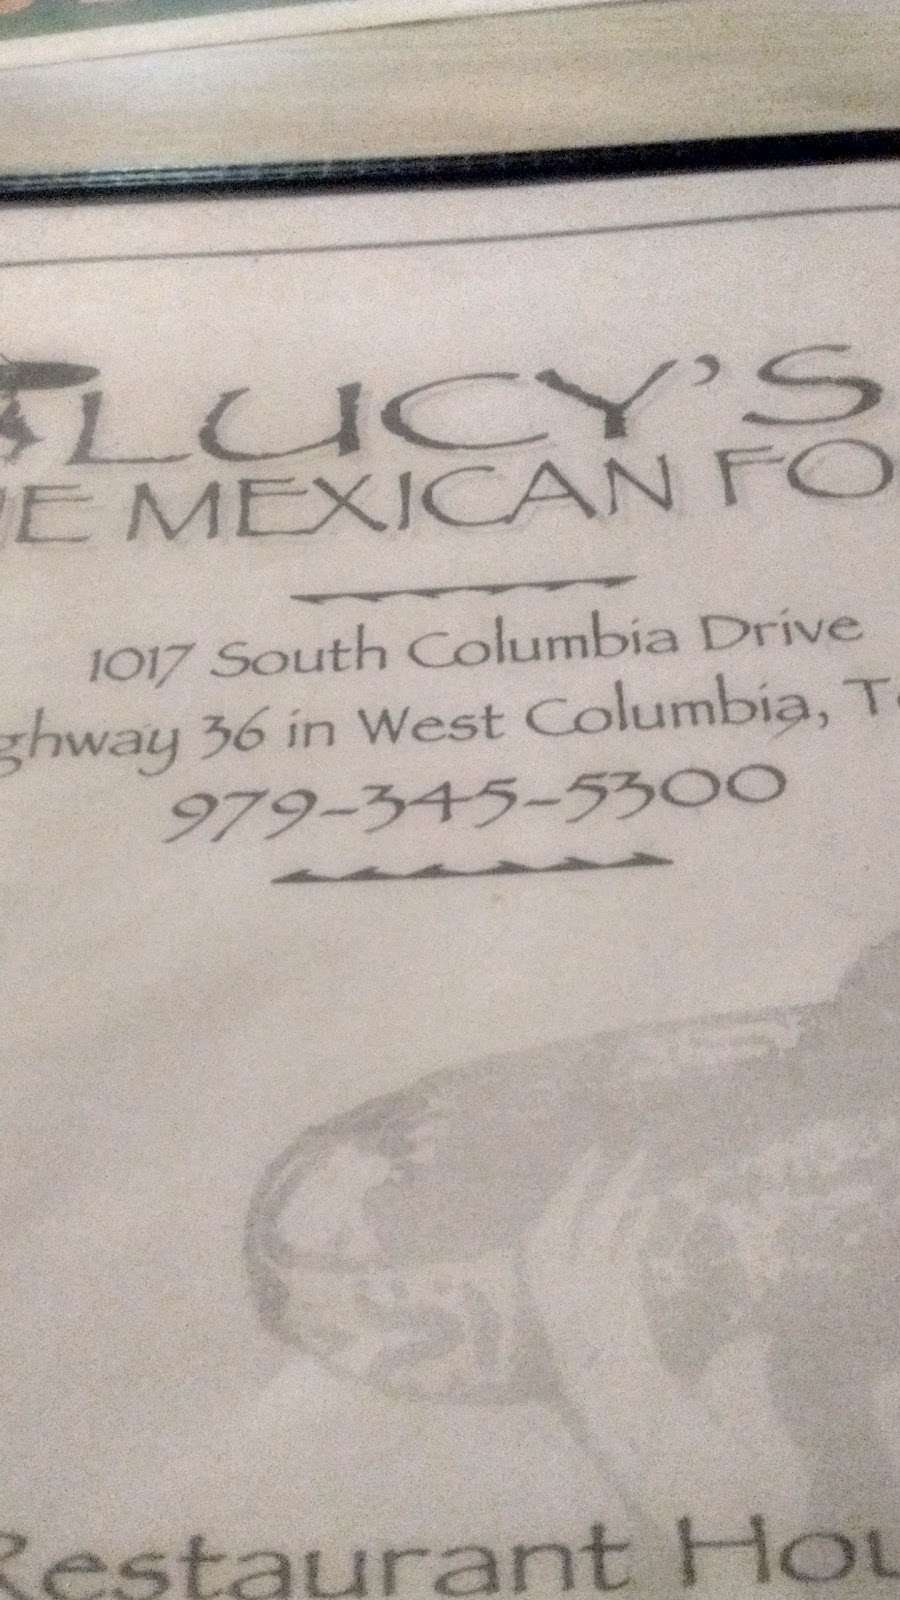 Lucys Mexican Restaurant | 1017 S Columbia Dr, West Columbia, TX 77486, USA | Phone: (979) 345-5300